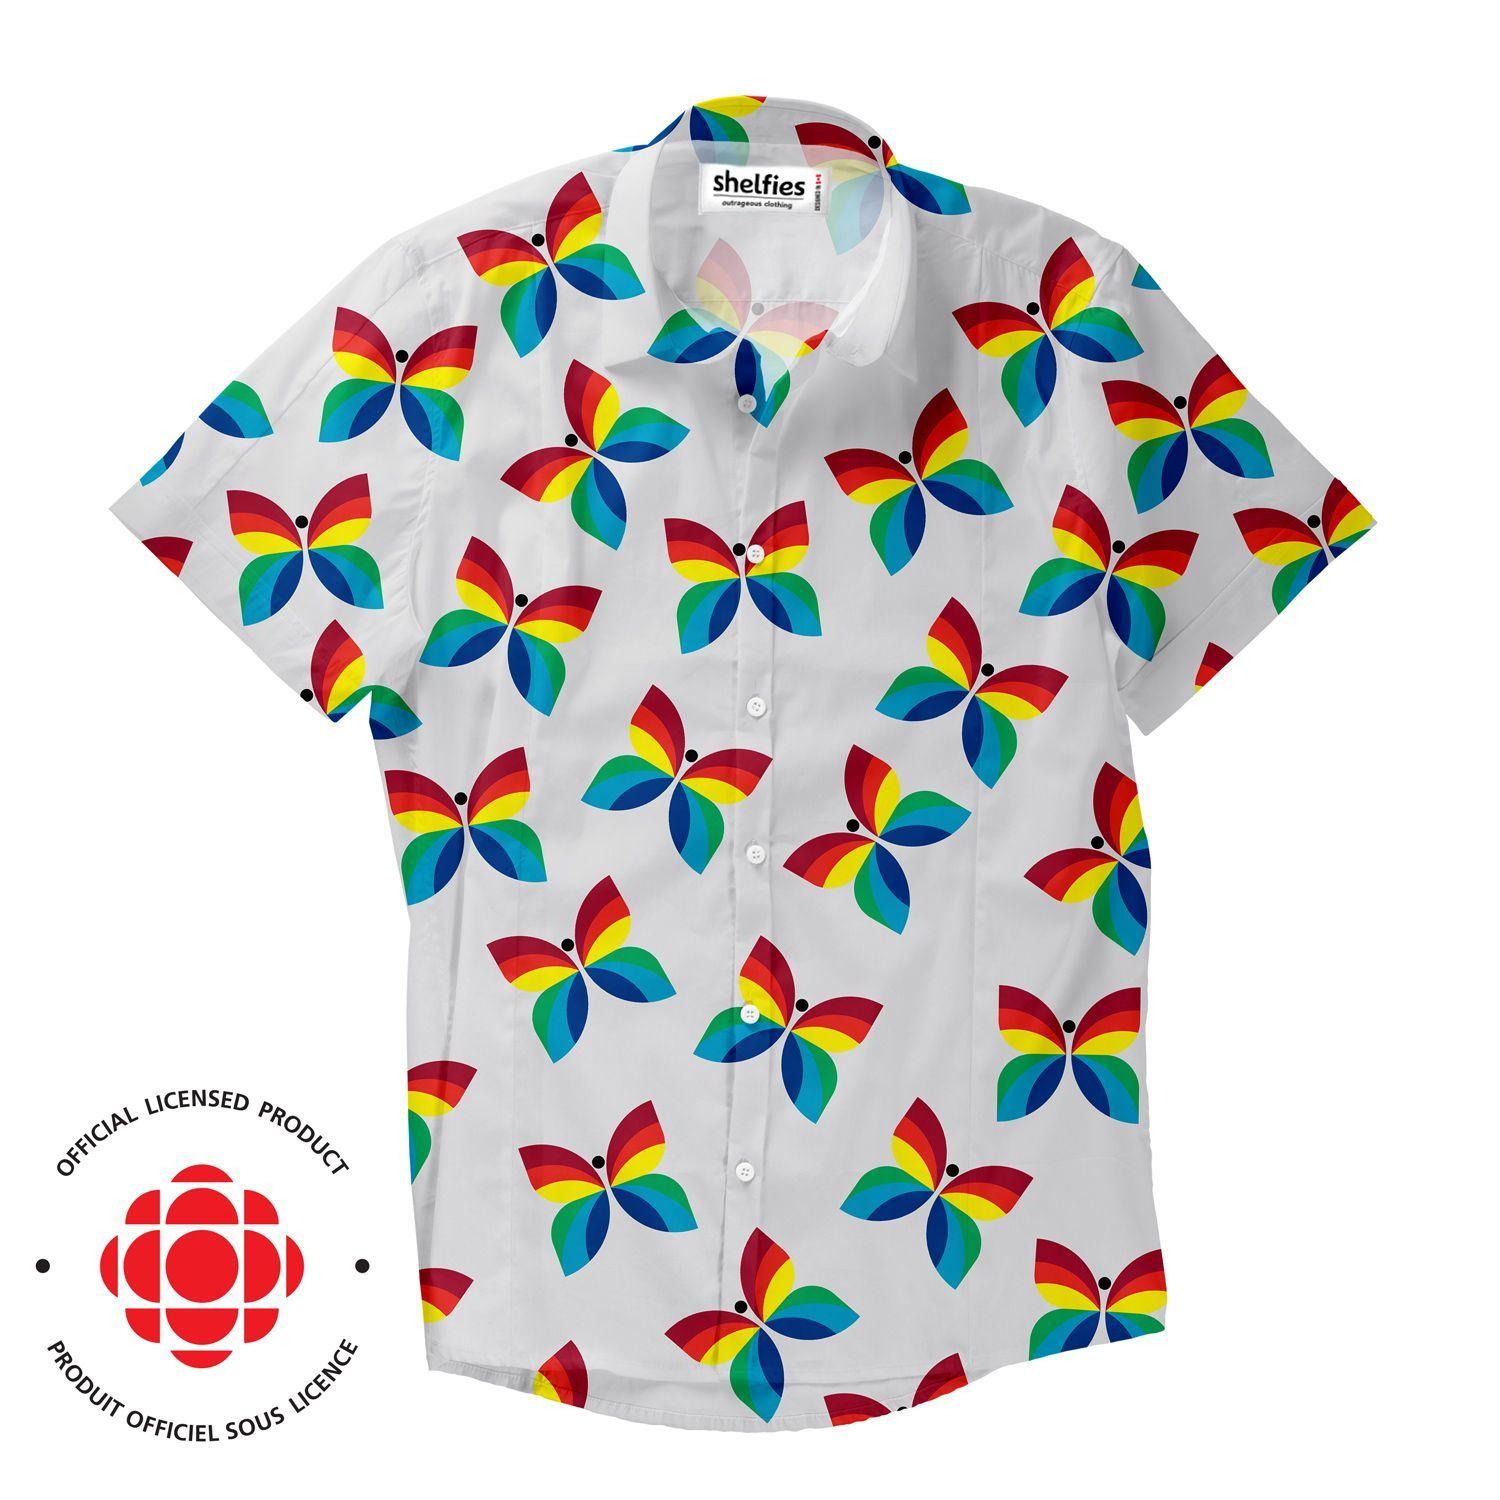 TV Butterfly Logo - Created In 1966 By Hubert Tison, The CBC Radio Canada Rainbow